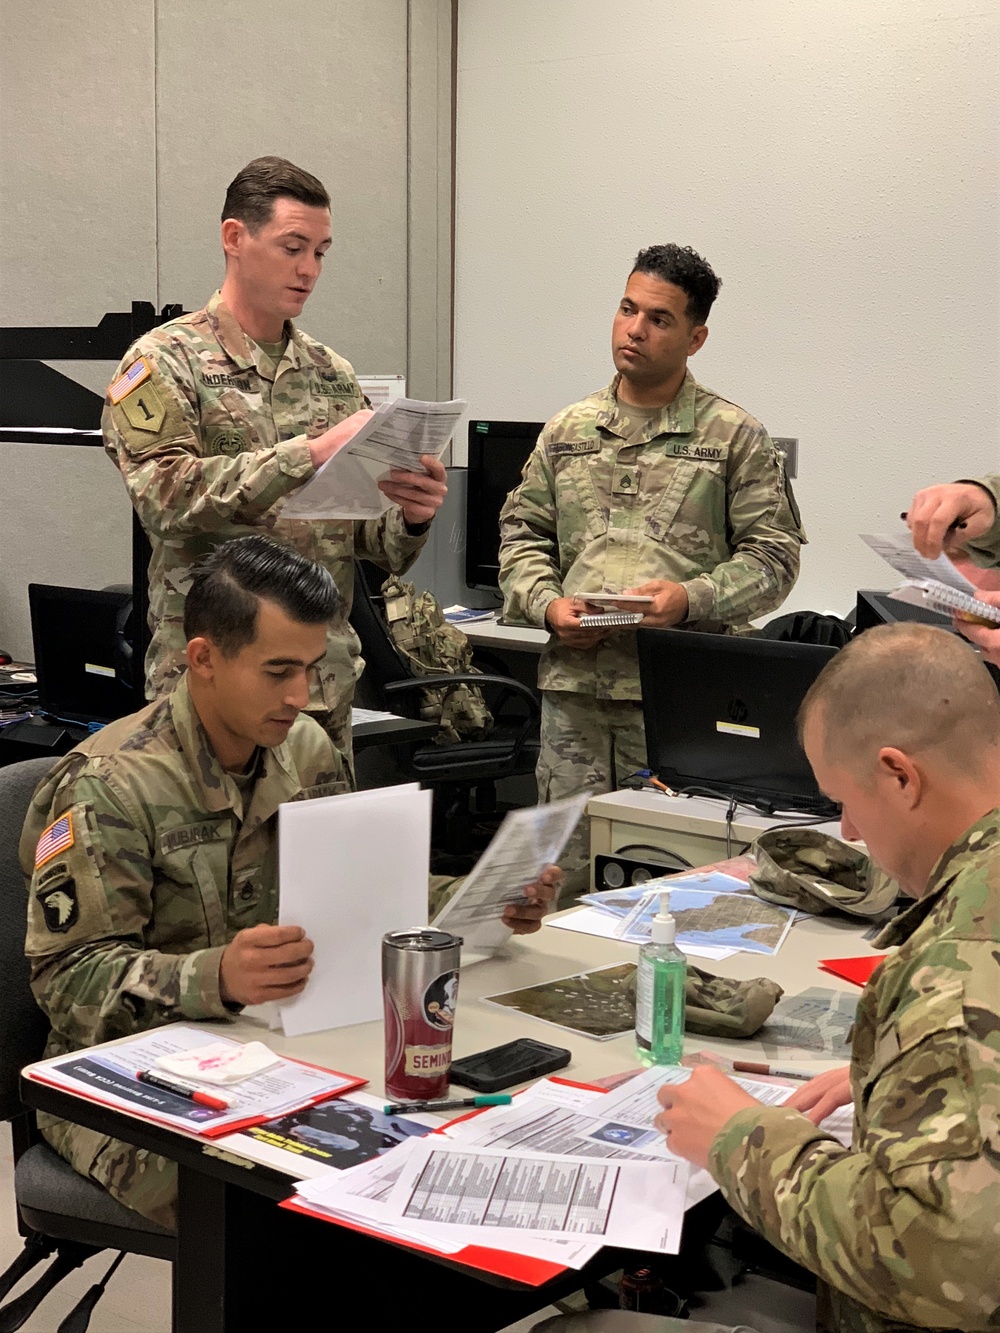 3rd SFAB Advisors instruct JFO-E course at Fort Hood